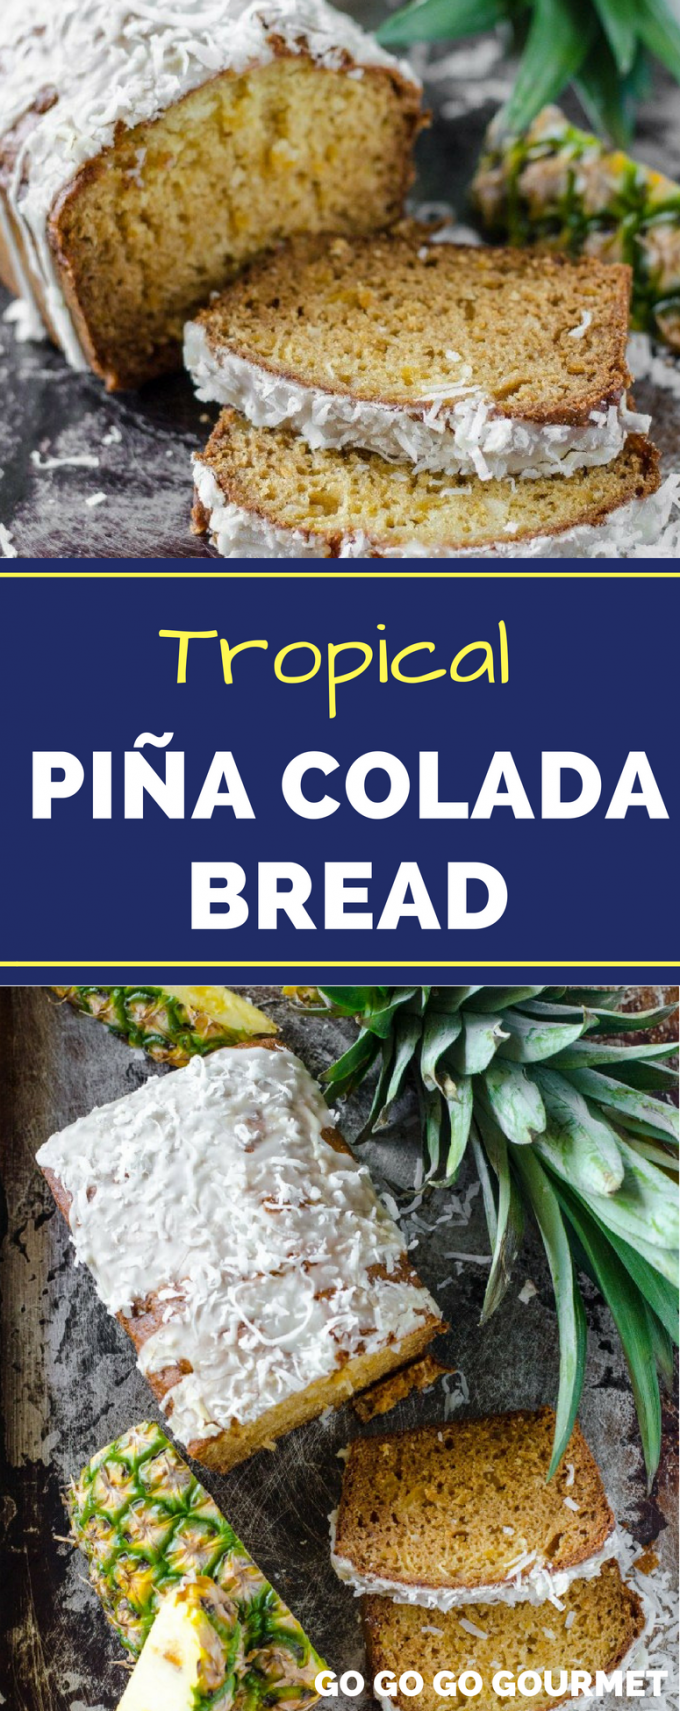 With crushed pineapple and coconut, this Pina Colada bread recipe will take you to the tropics with every slice! It's tropical flavors make an excellent dessert! #pinacoladabread #pineapplecoconutcread #pineappleloaf #gogogogourmet via @gogogogourmet